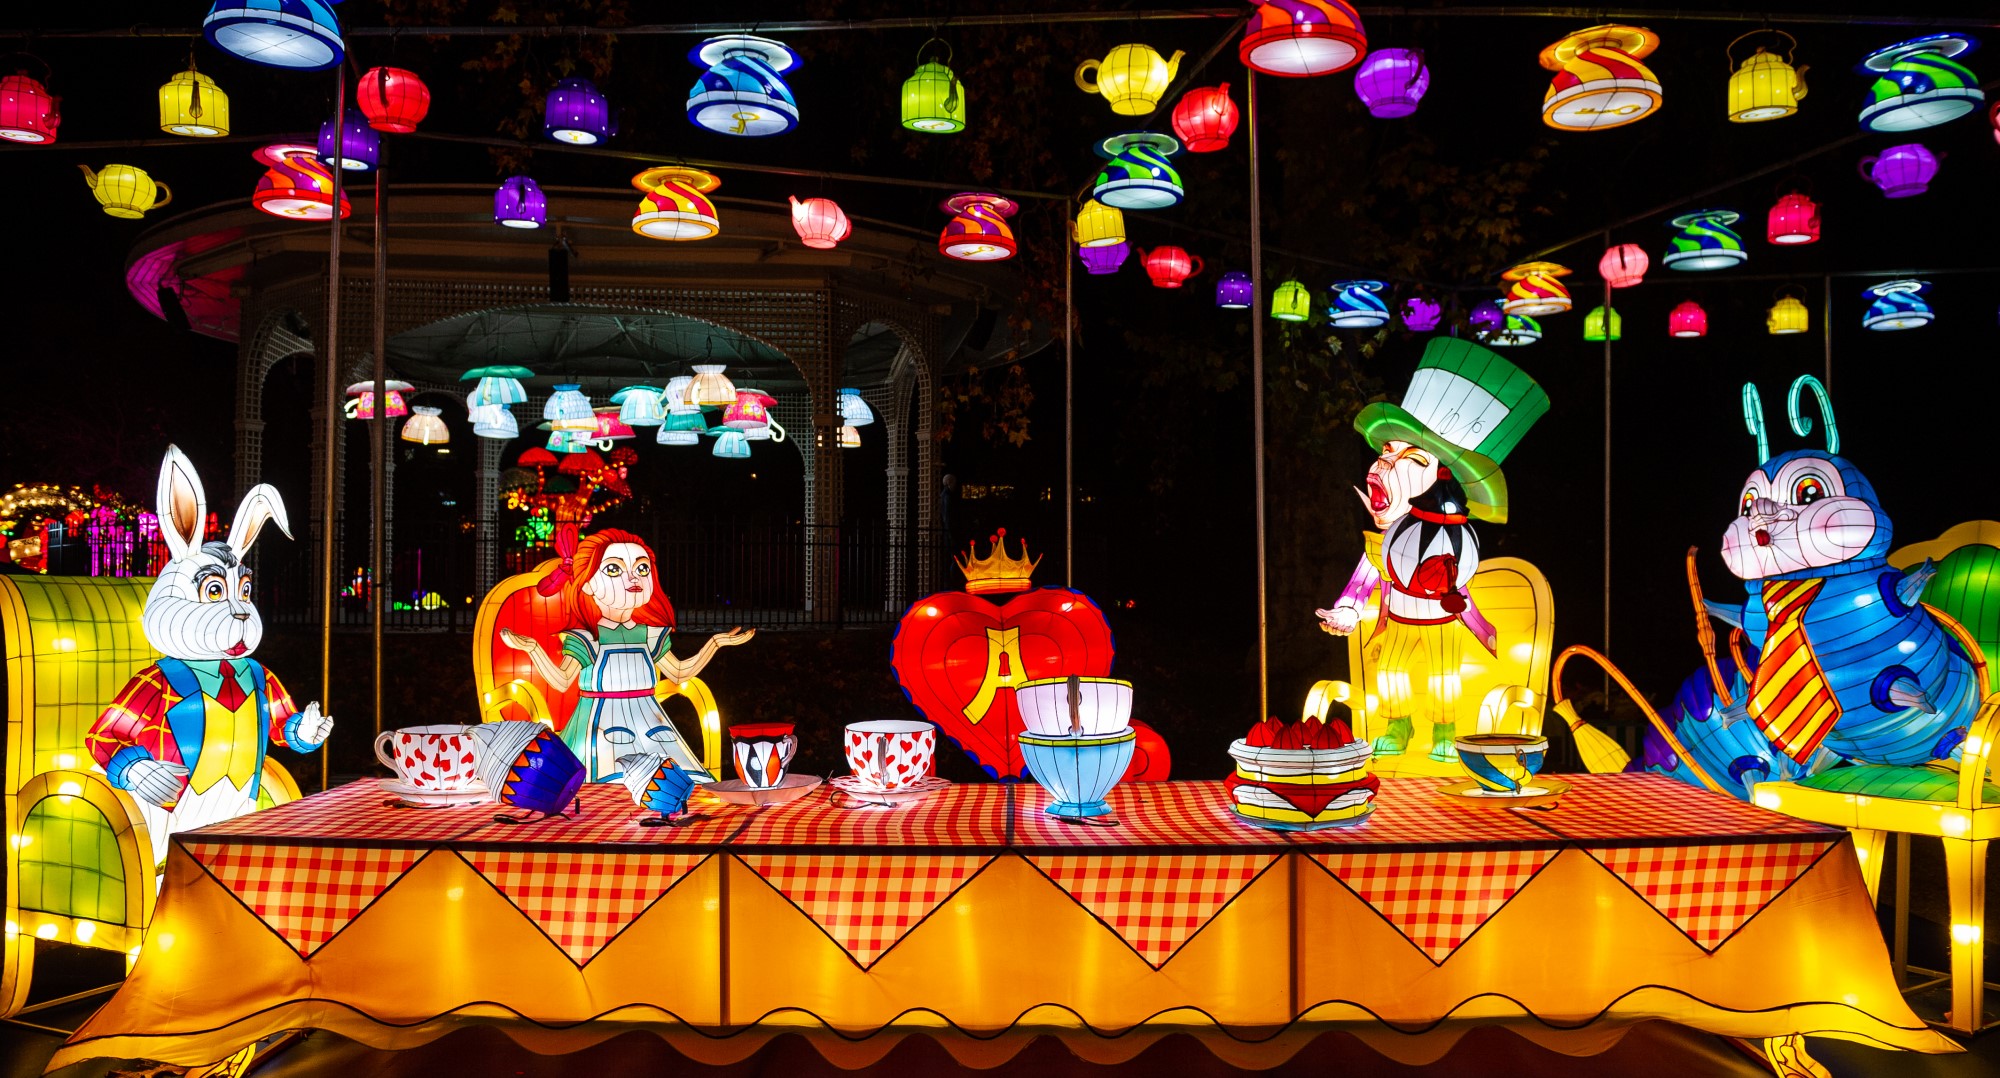 One of the installation at the Alice in Wonderland light festival